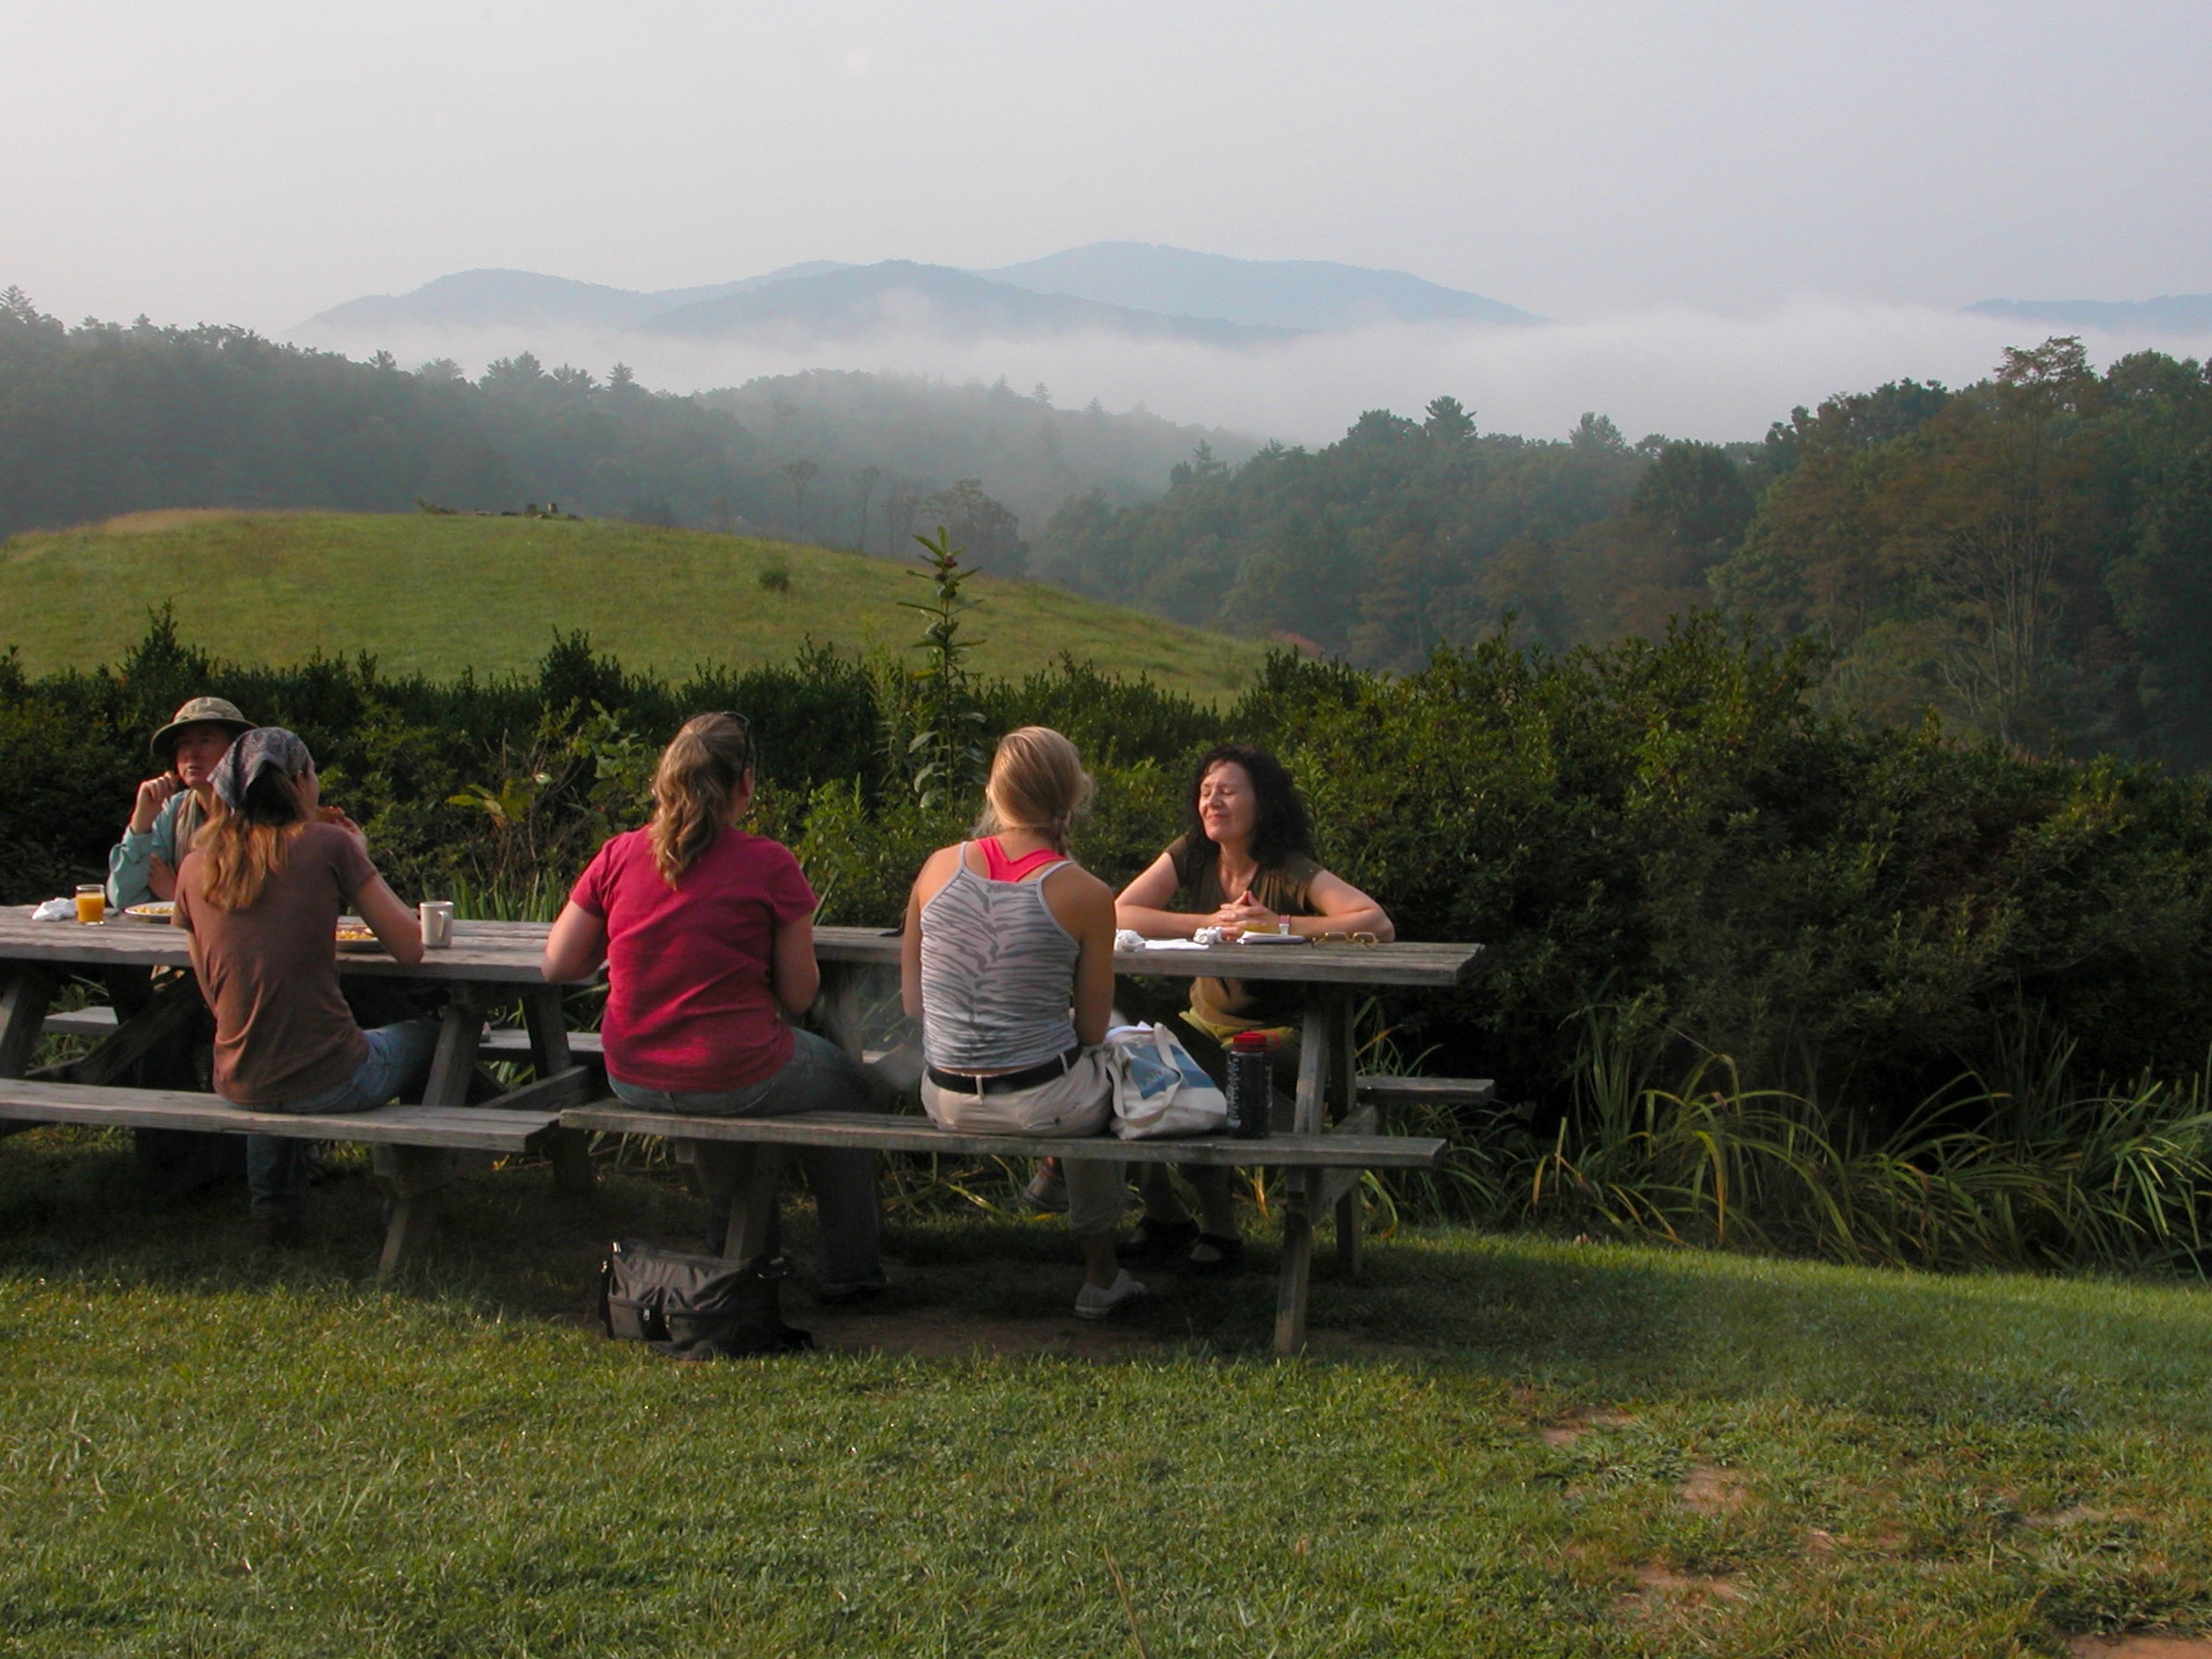 Every artist should visit Penland, whether for a day or to take one of their immersive summer classes in any number of disciplines. A wonderful creative haven in the beautiful Blueridge mountains of N. Carolina.